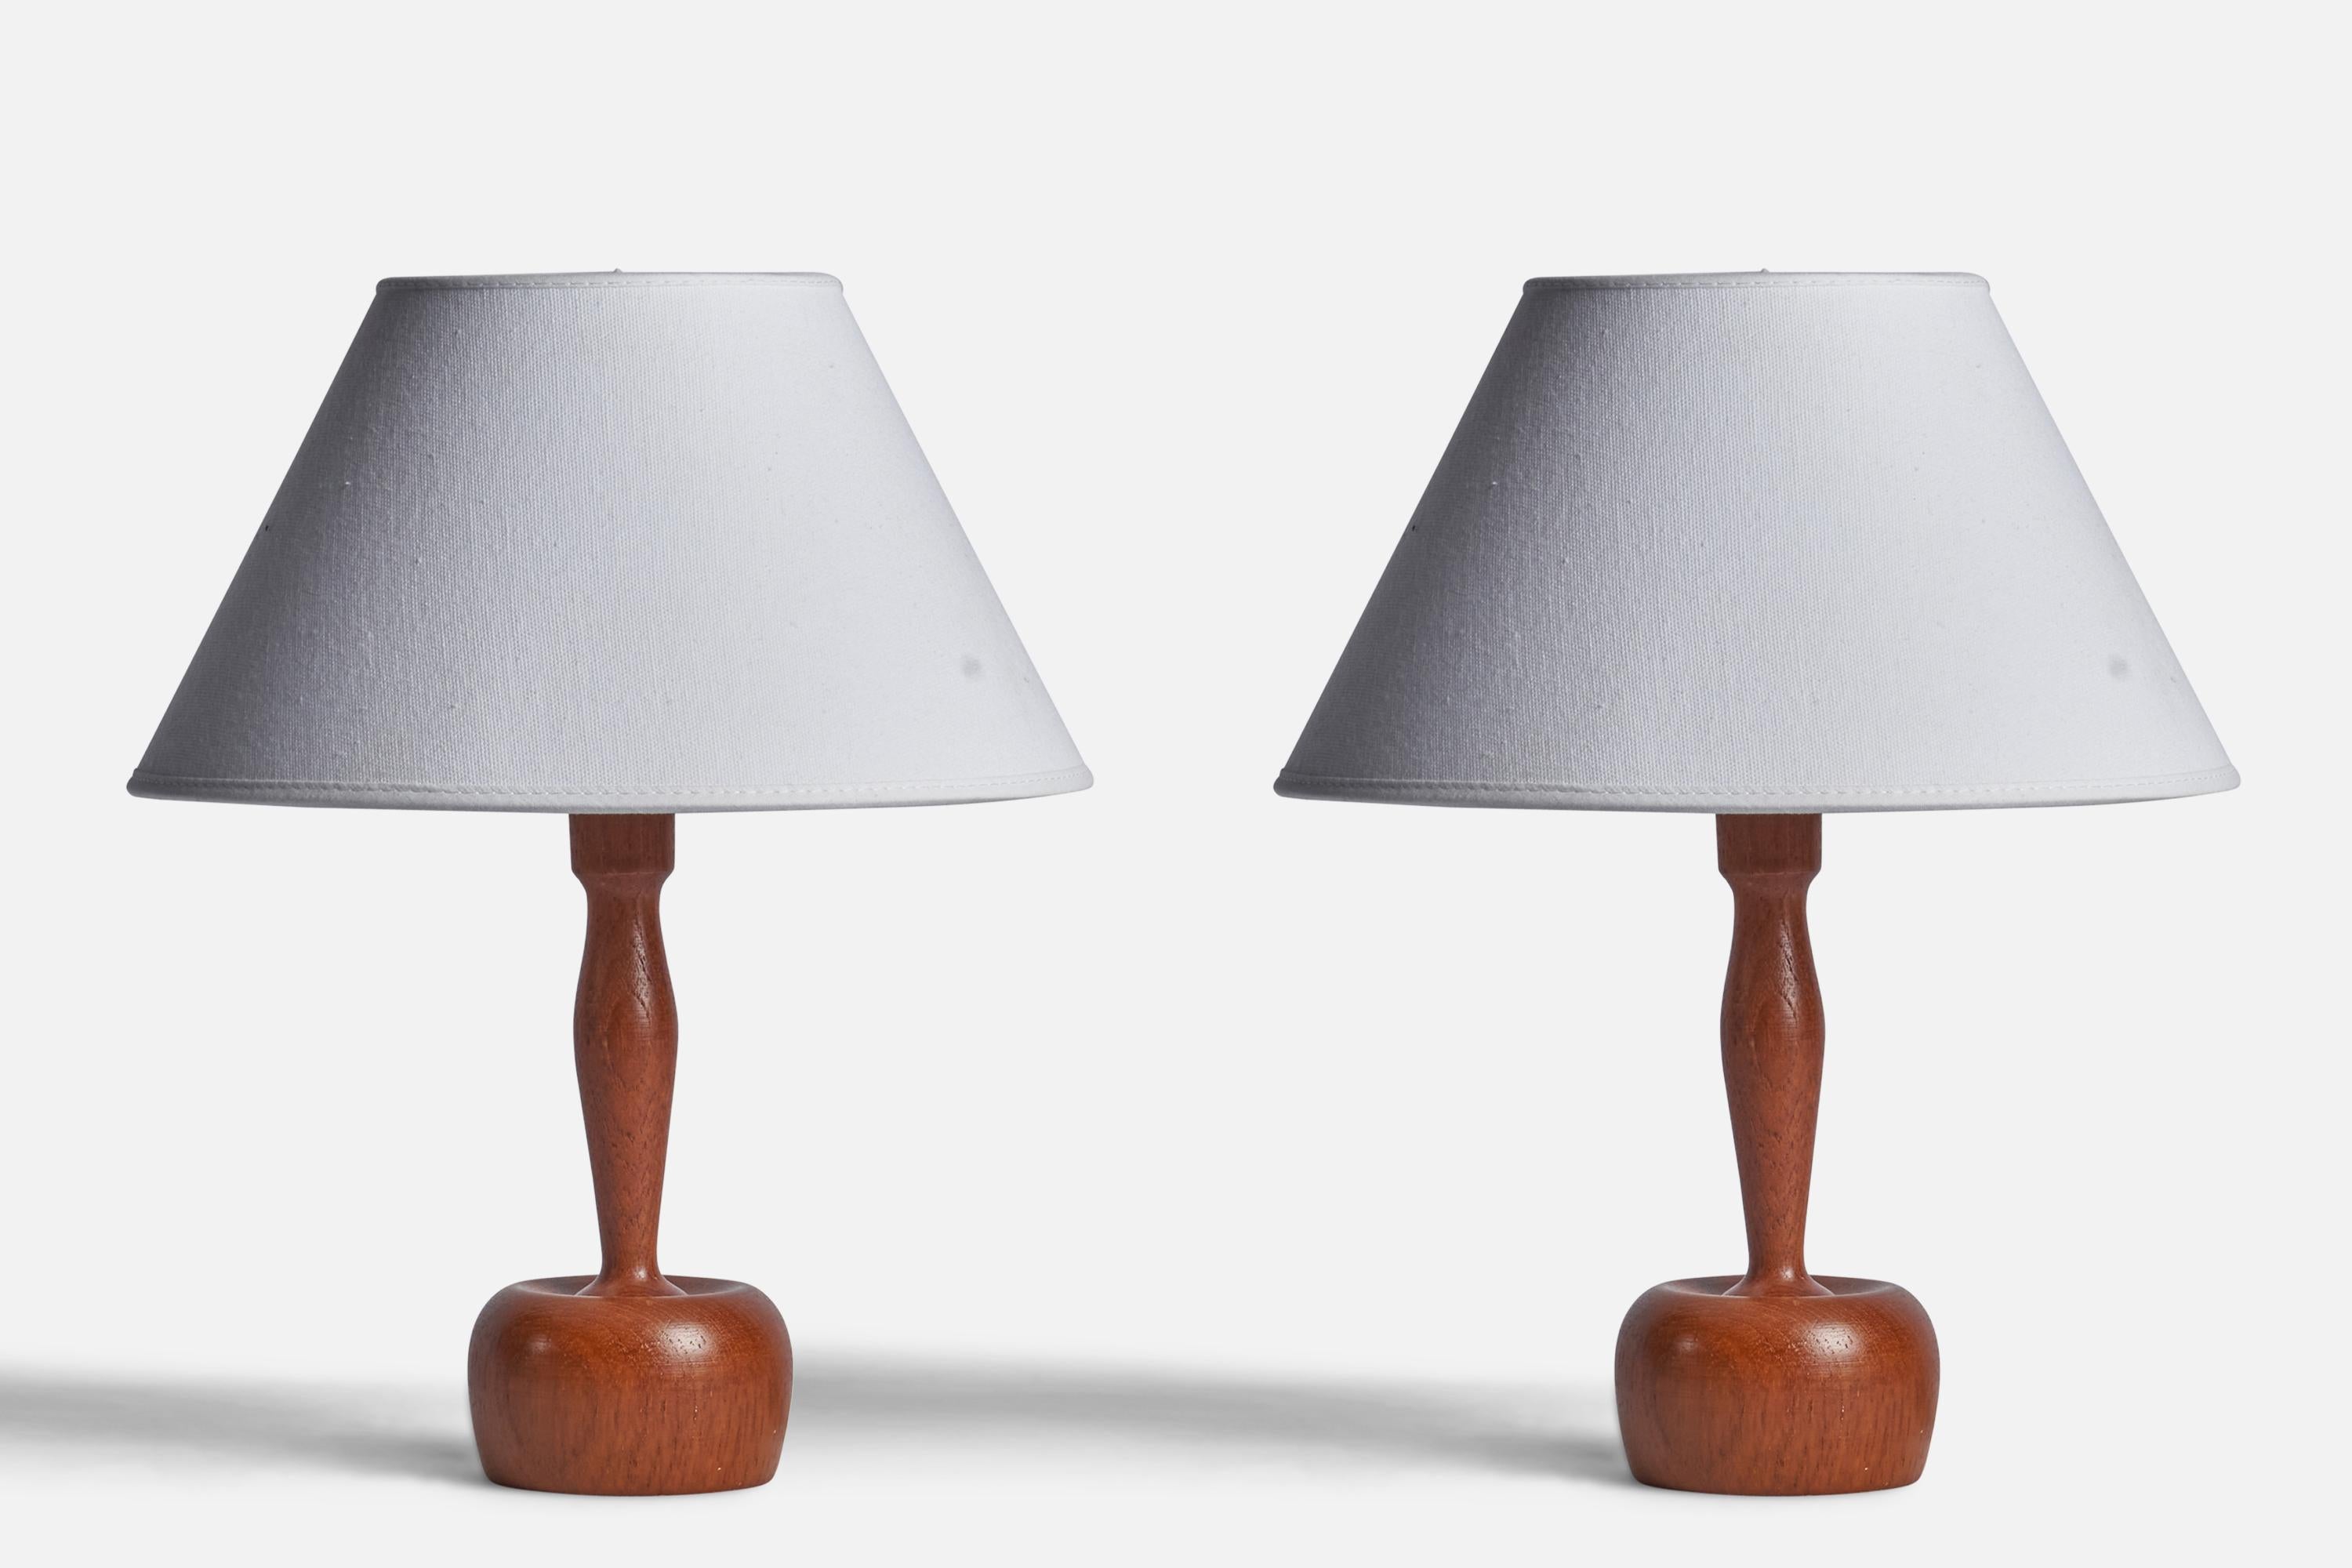 A pair of turned teak table lamps designed and produced by Markslöjd, Kinna, Sweden, 1960s.

Dimensions of Lamp (inches): 9.25” H x 3.35” Diameter
Dimensions of Shade (inches): 4.5” Top Diameter x 10” Bottom Diameter x 5.25” H 
Dimensions of Lamp